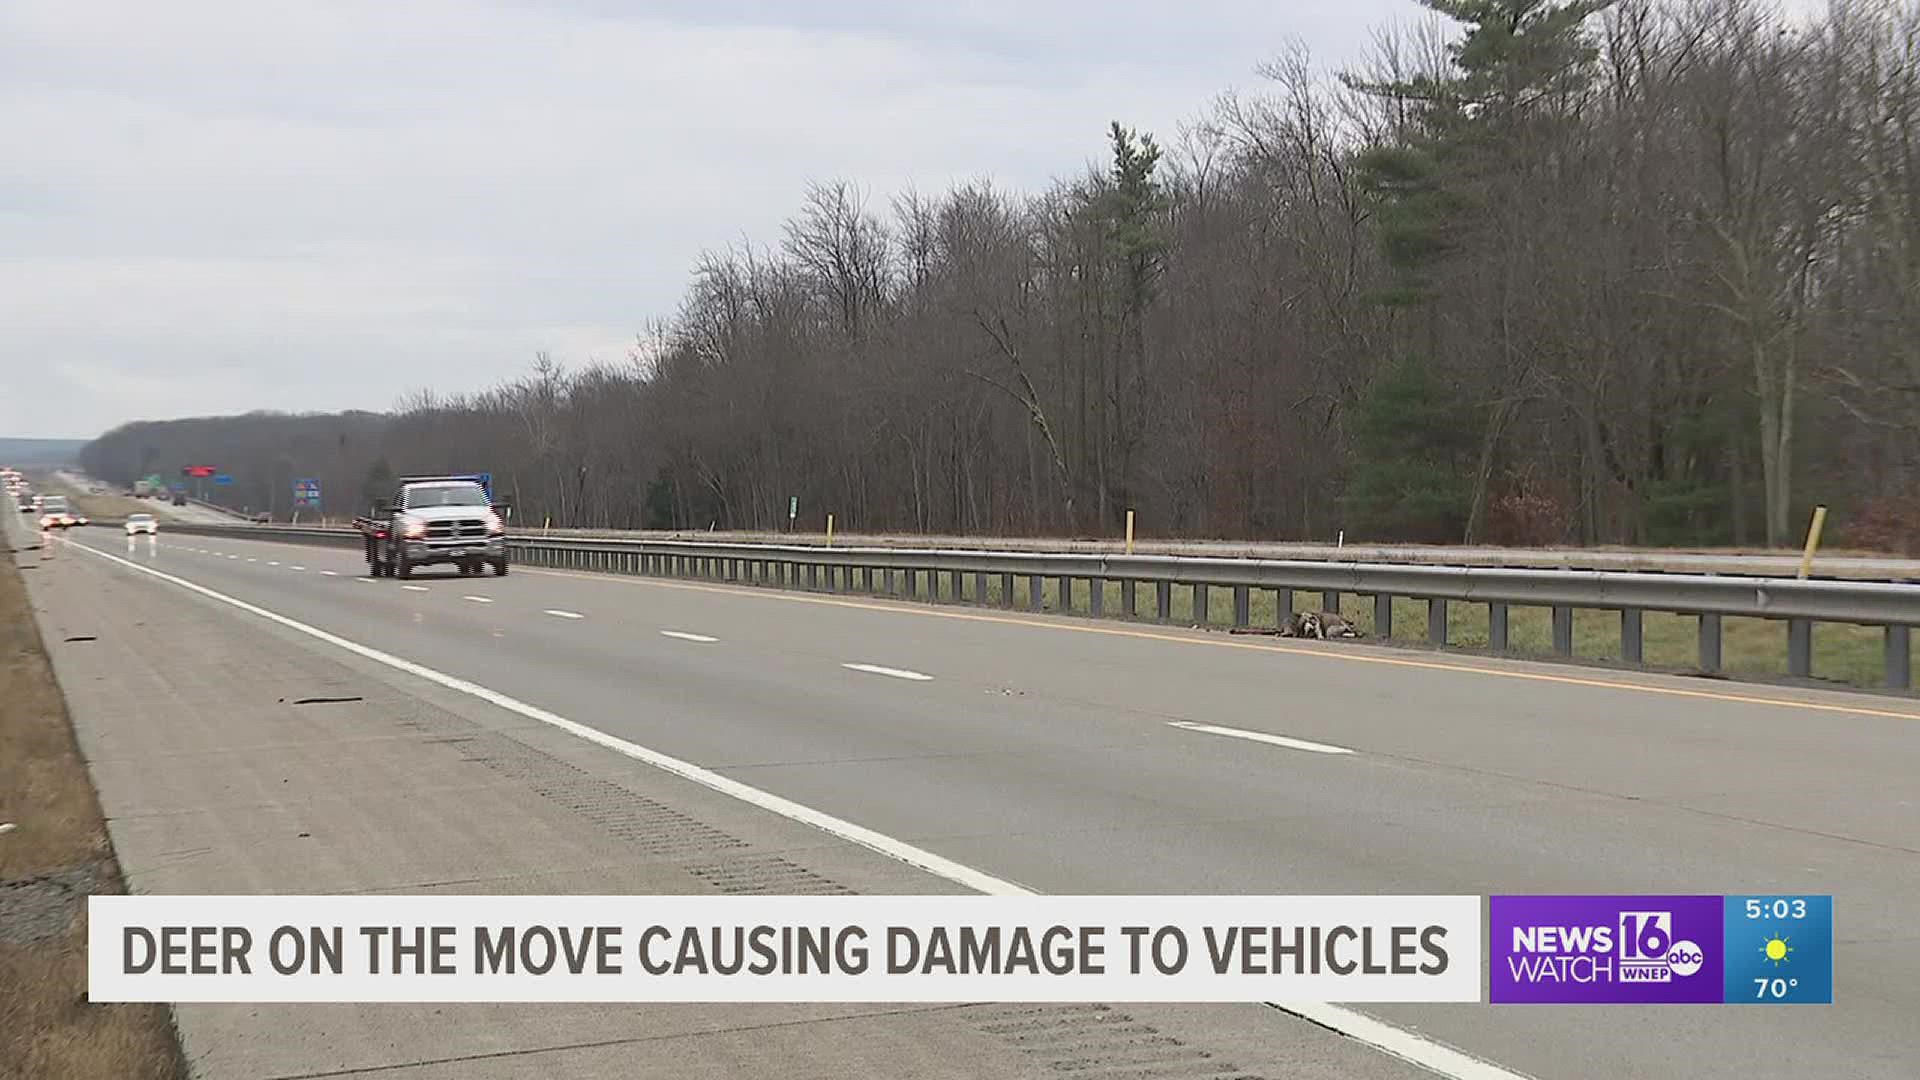 Newswatch 16's Amanda Eustice shows us damage done to vehicles in the Poconos.